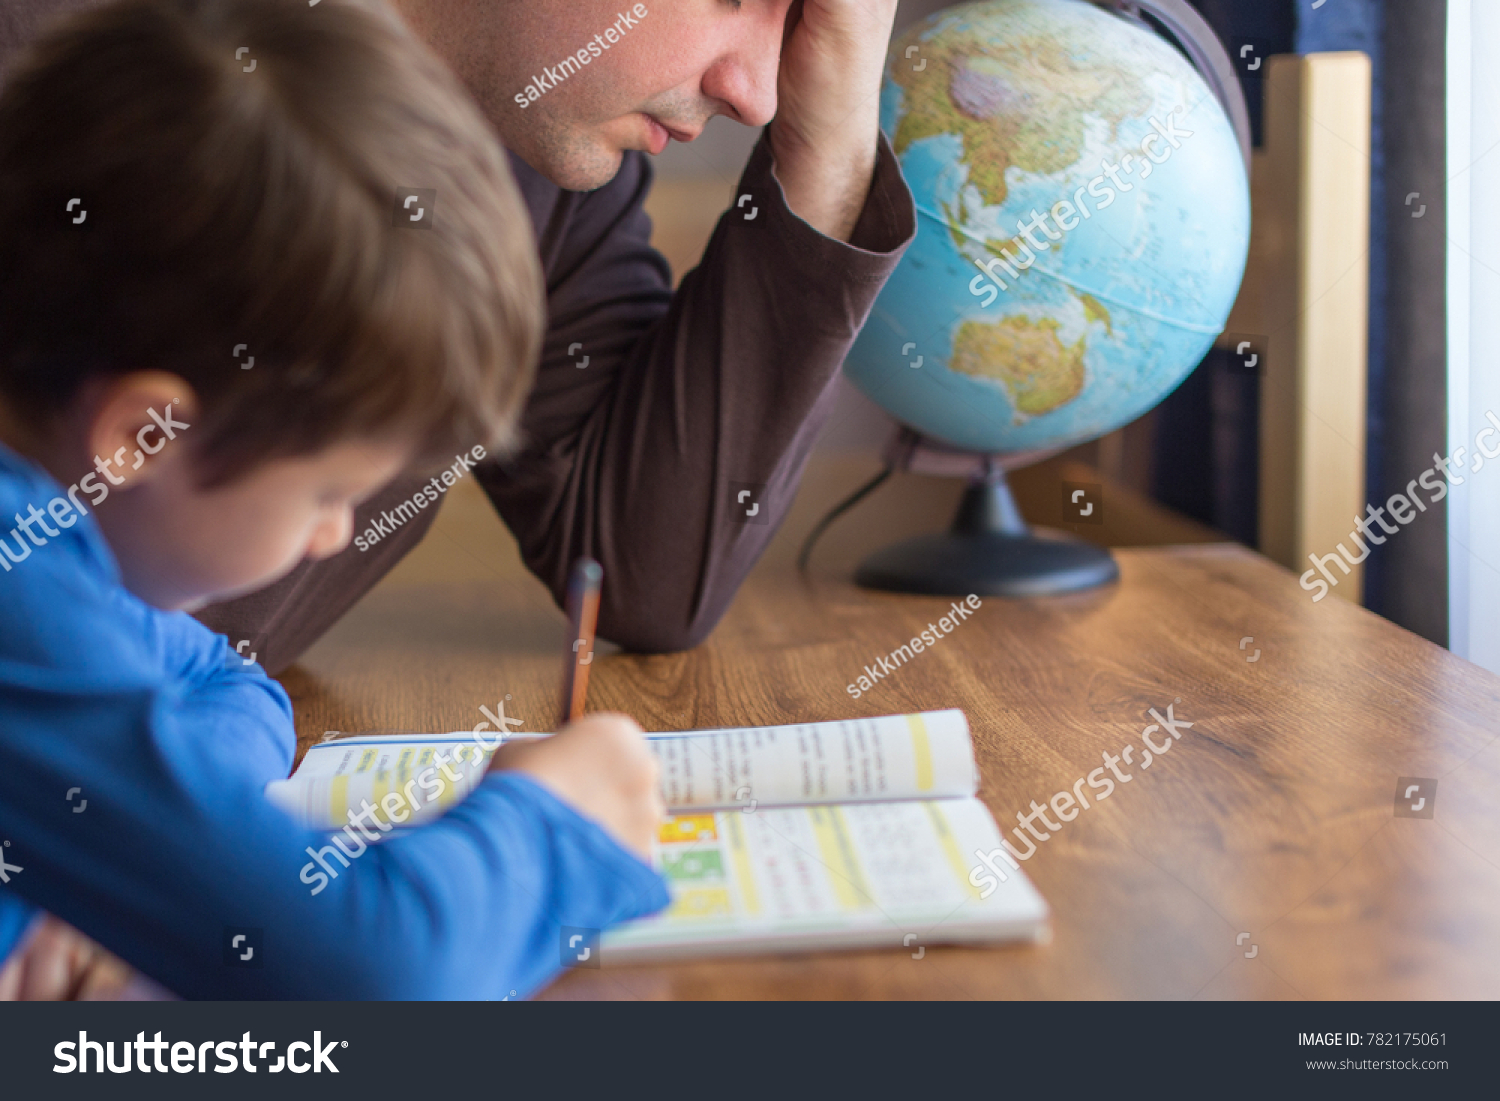 Sad father tired about helping little son in mathematics homework #782175061